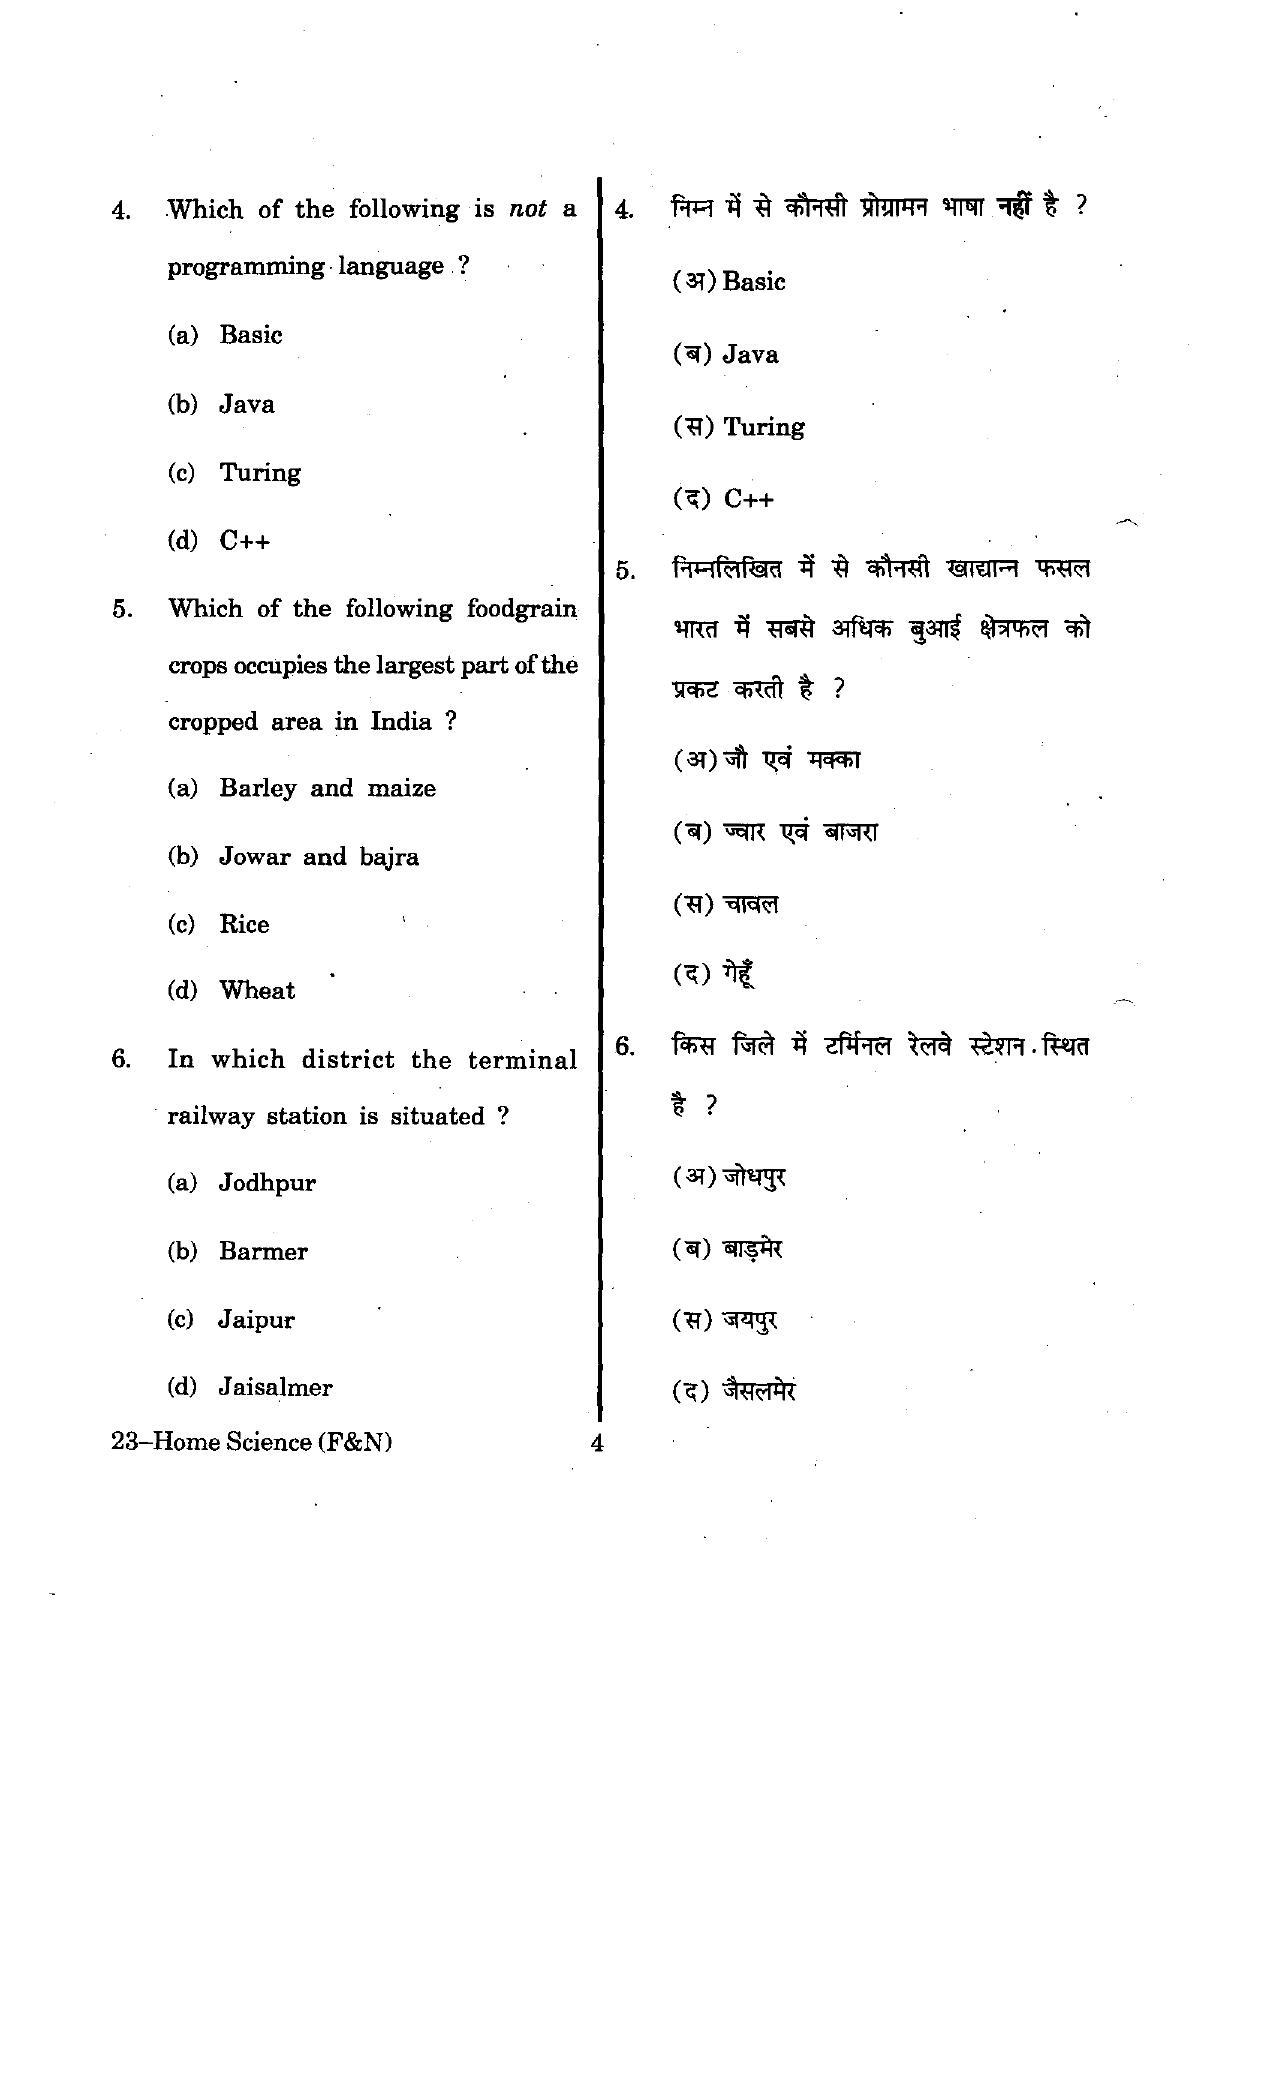 URATPG Home Science(Food & Nut.) 2012 Question Paper - Page 4